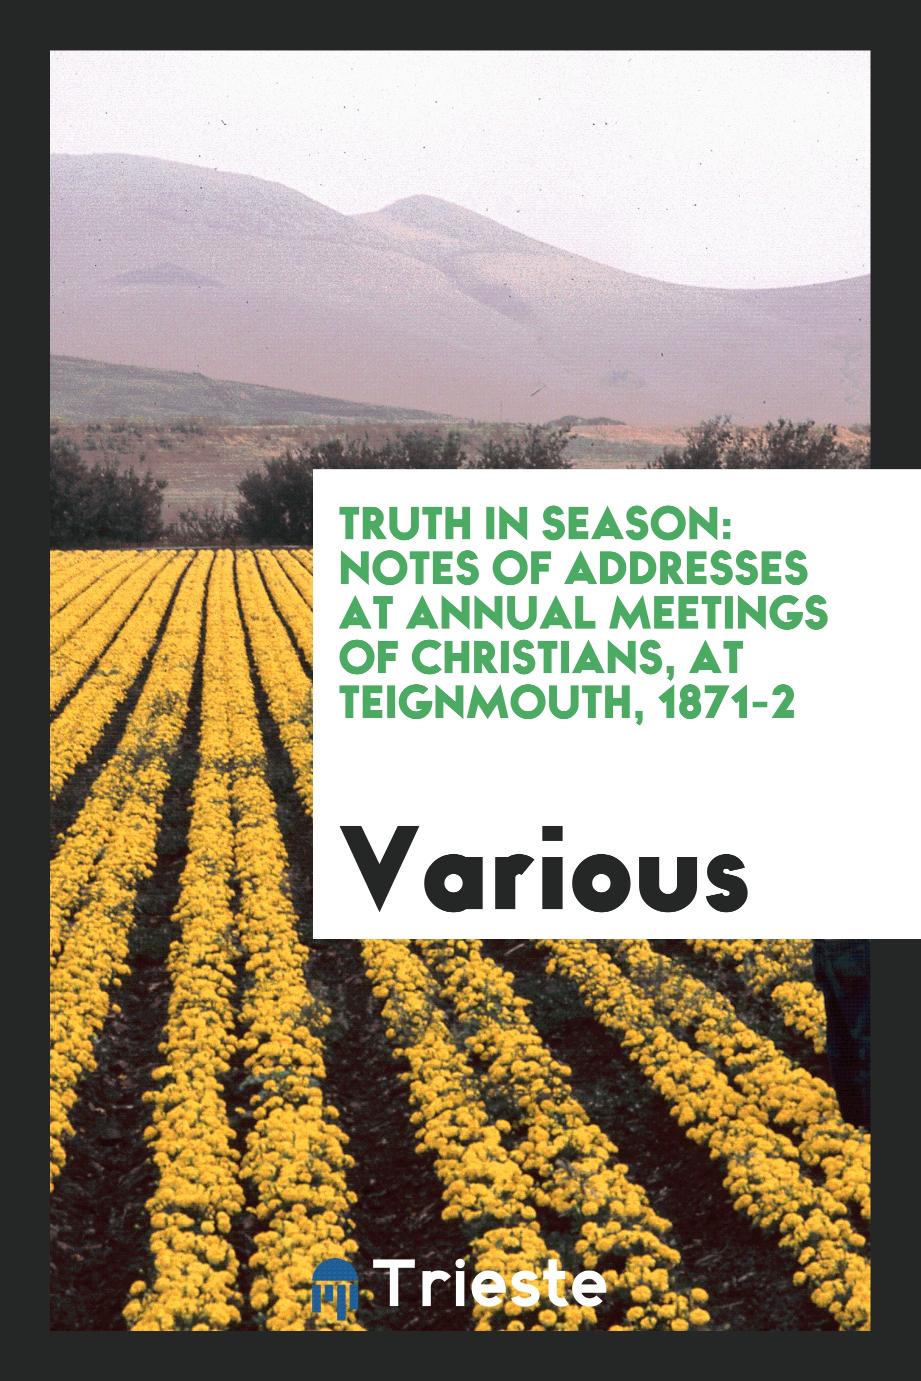 Truth in season: notes of addresses at annual meetings of Christians, at Teignmouth, 1871-2